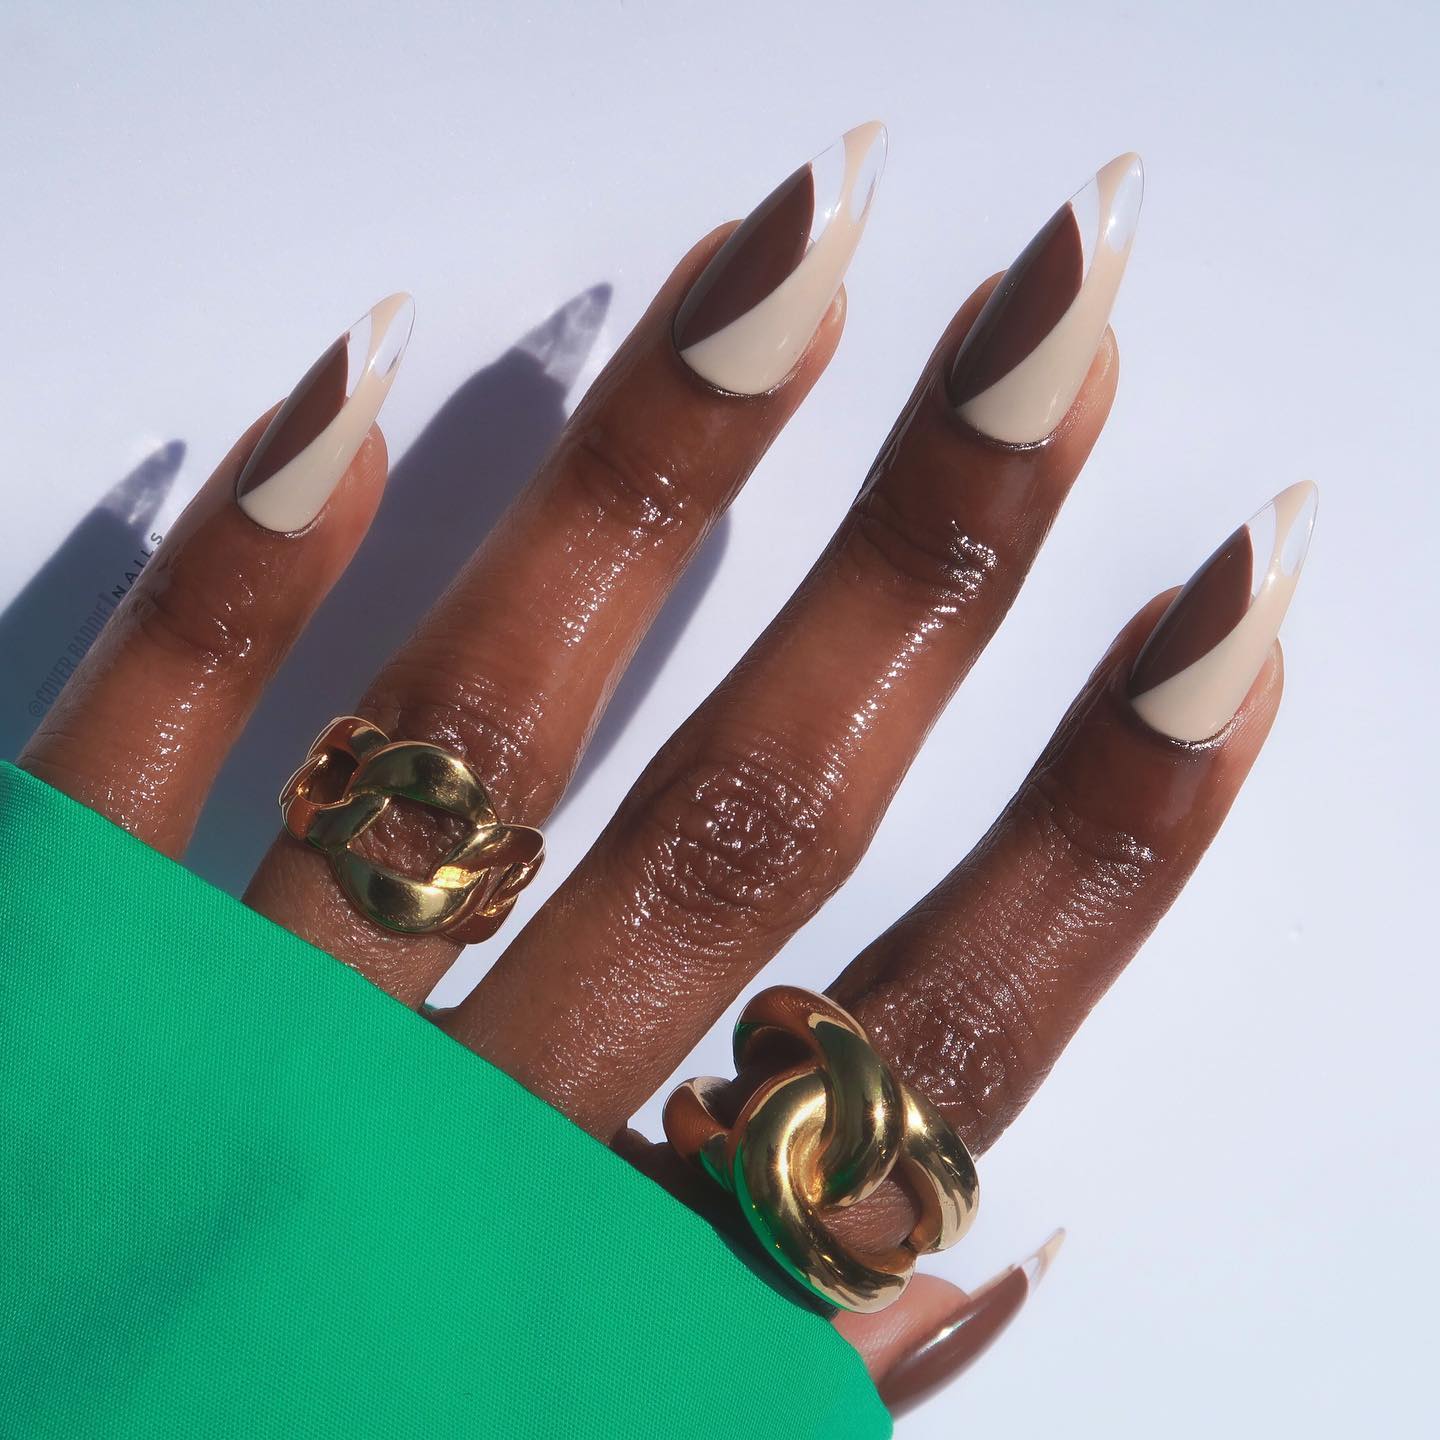 Candace Henderson Cover Baddie Nails